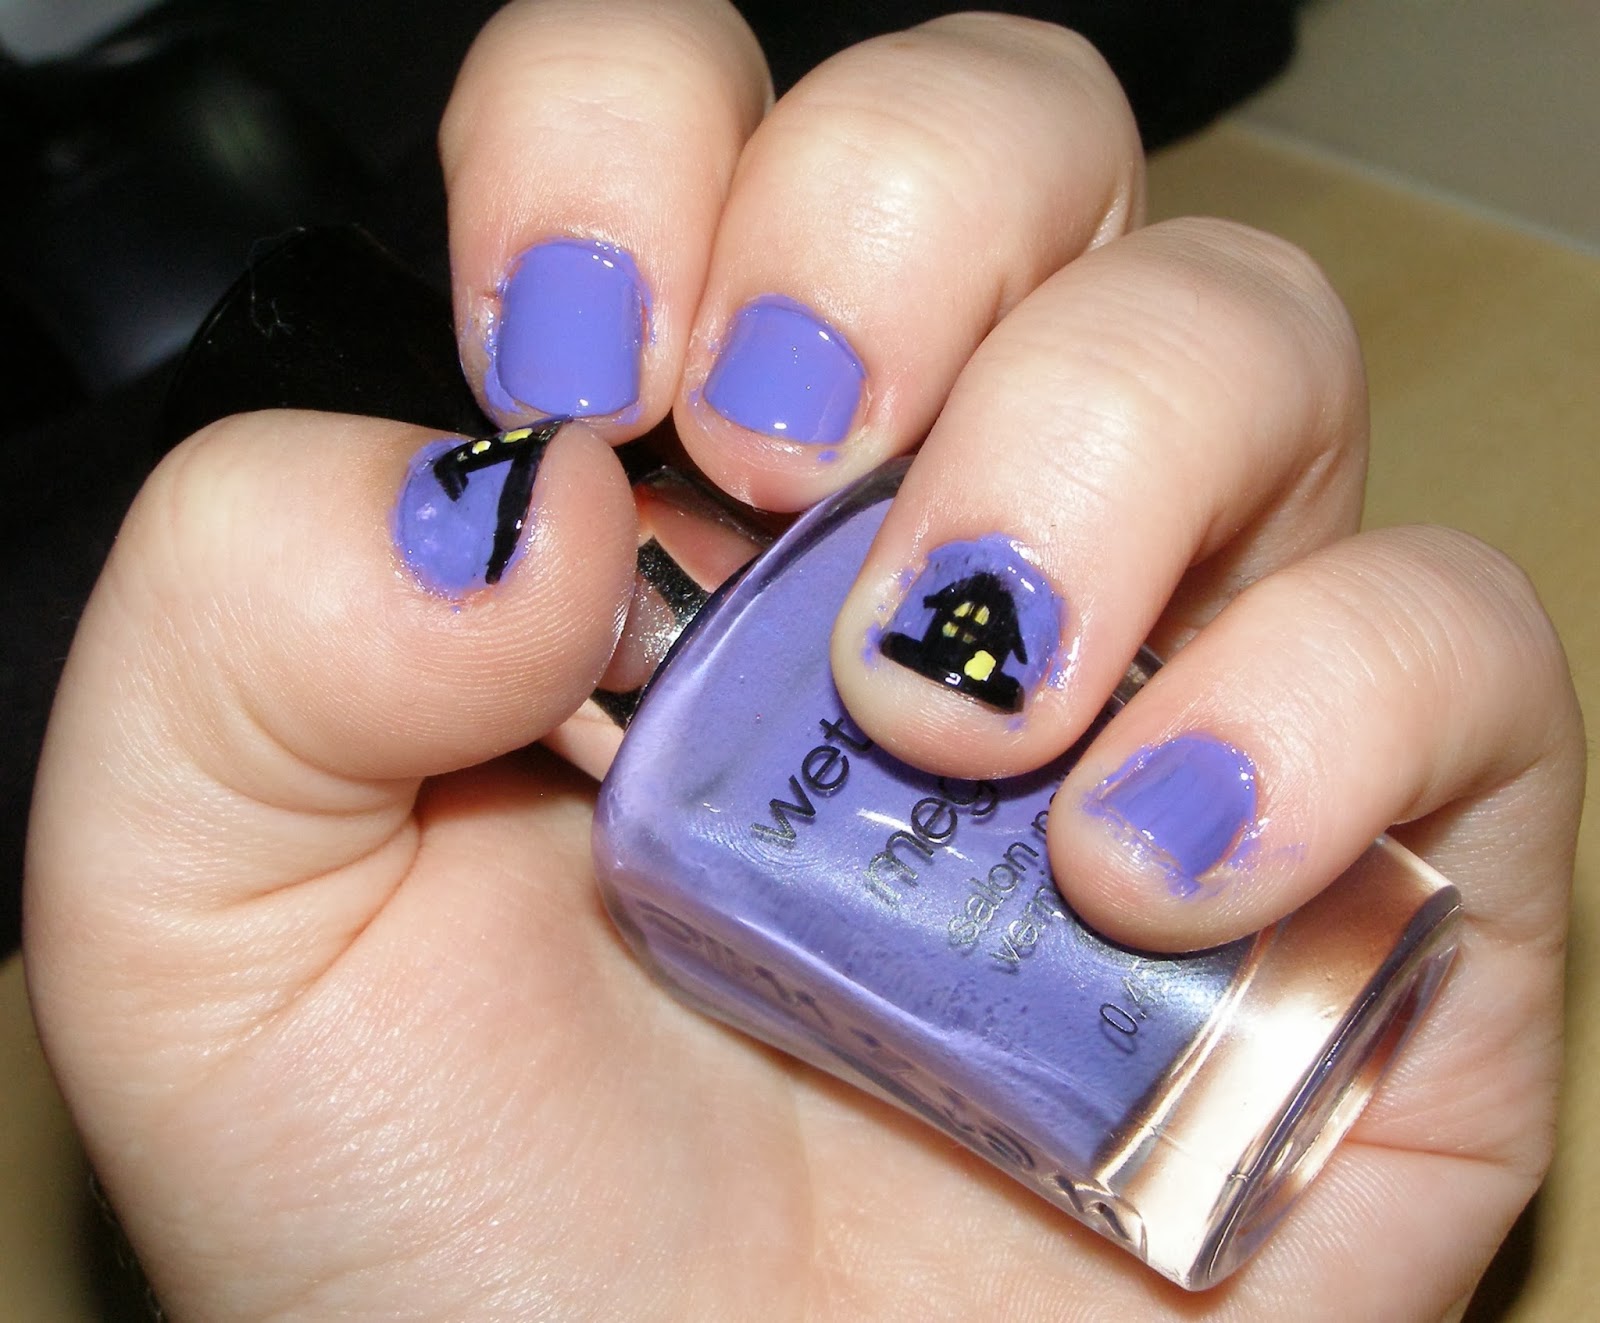 8. "Haunted house nail art tutorial" - wide 9